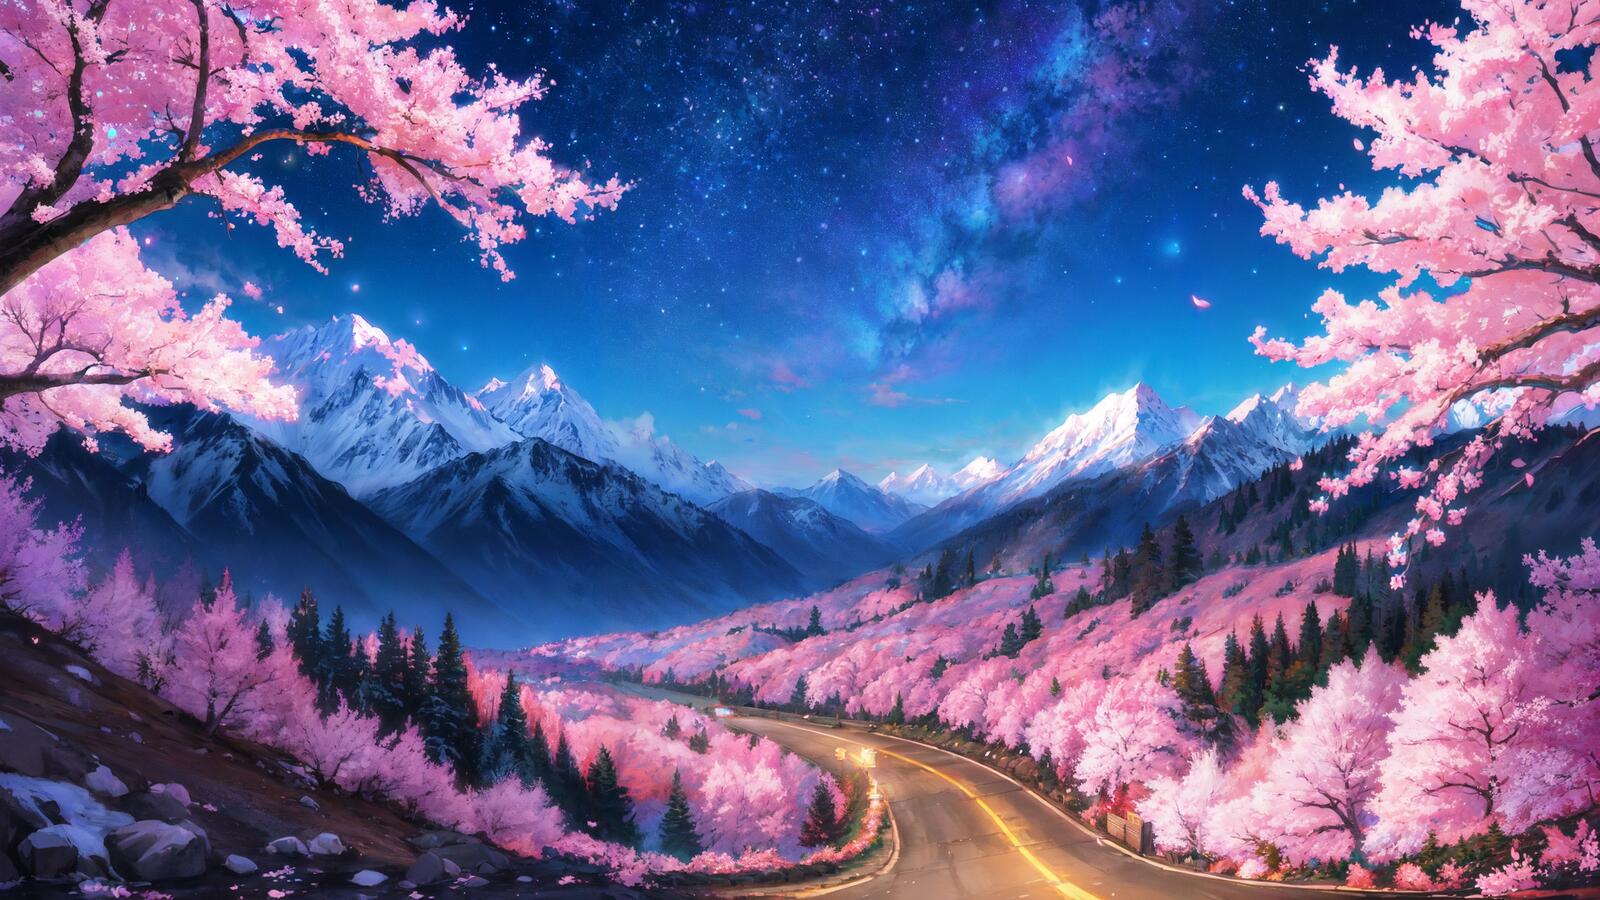 Free photo Fantasy landscape with mountains and pink trees